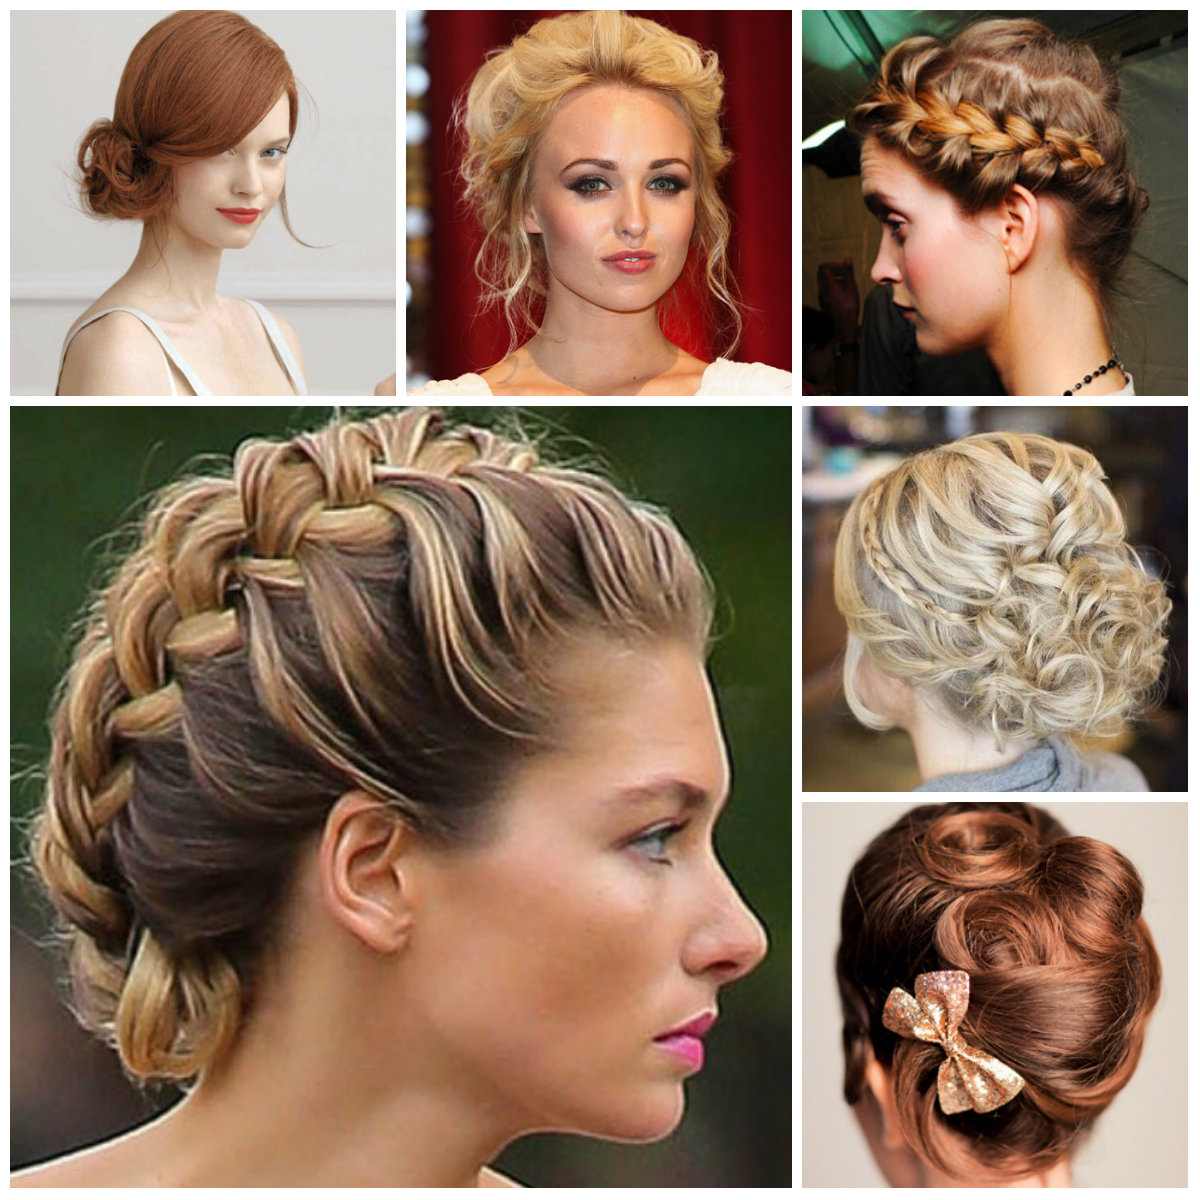 22 Perfect Birthday Hairstyles That You Can Try At Home